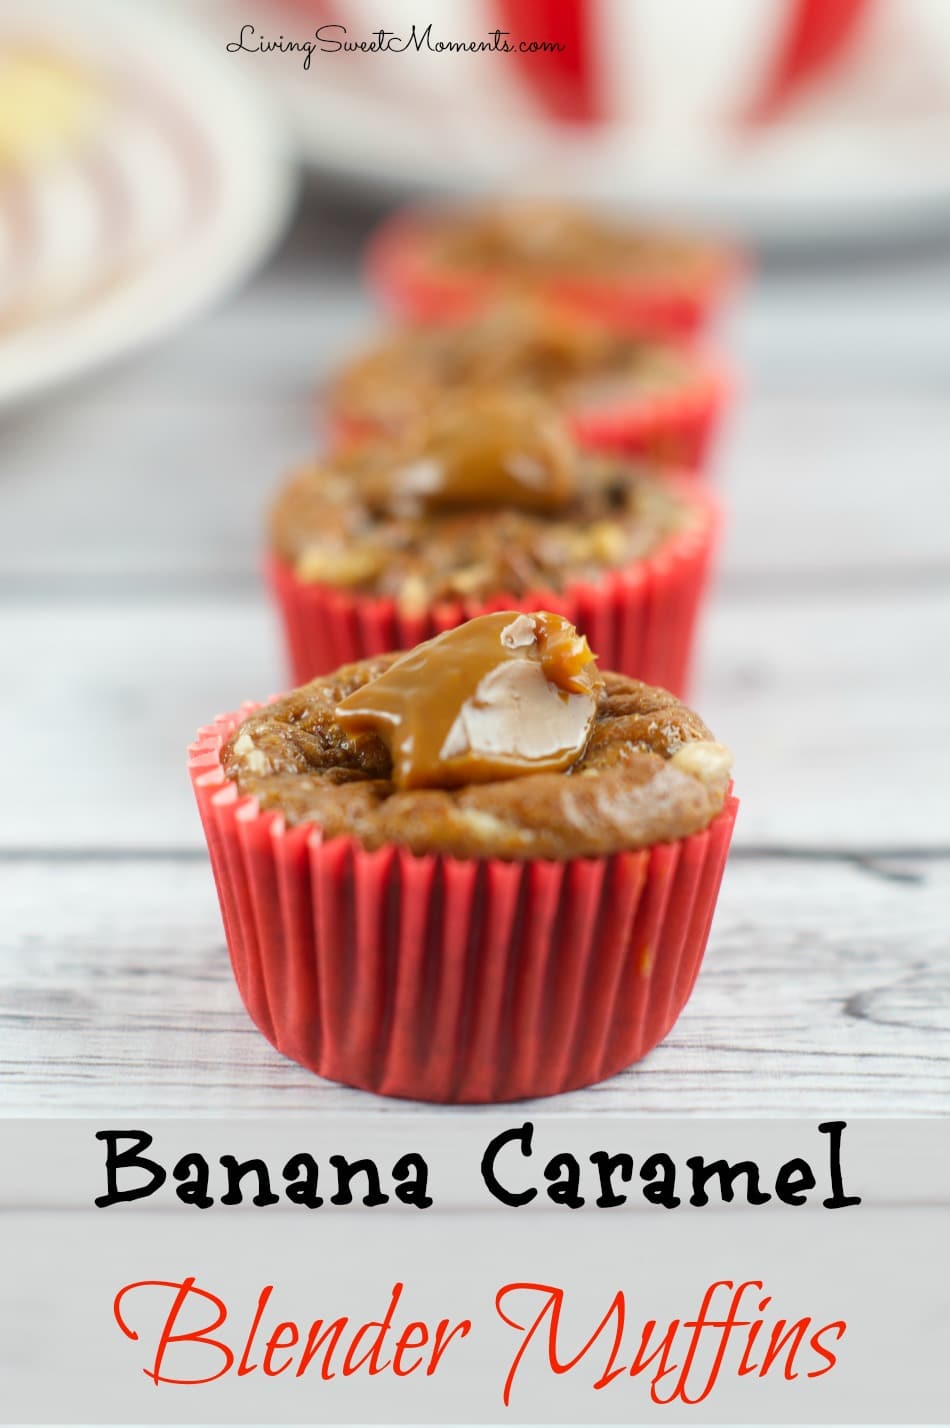 Banana Caramel Muffins - Gluten free muffins made in the blender! Just 5 ingredients are needed to make the moistest and most delicious muffins you will ever try. 